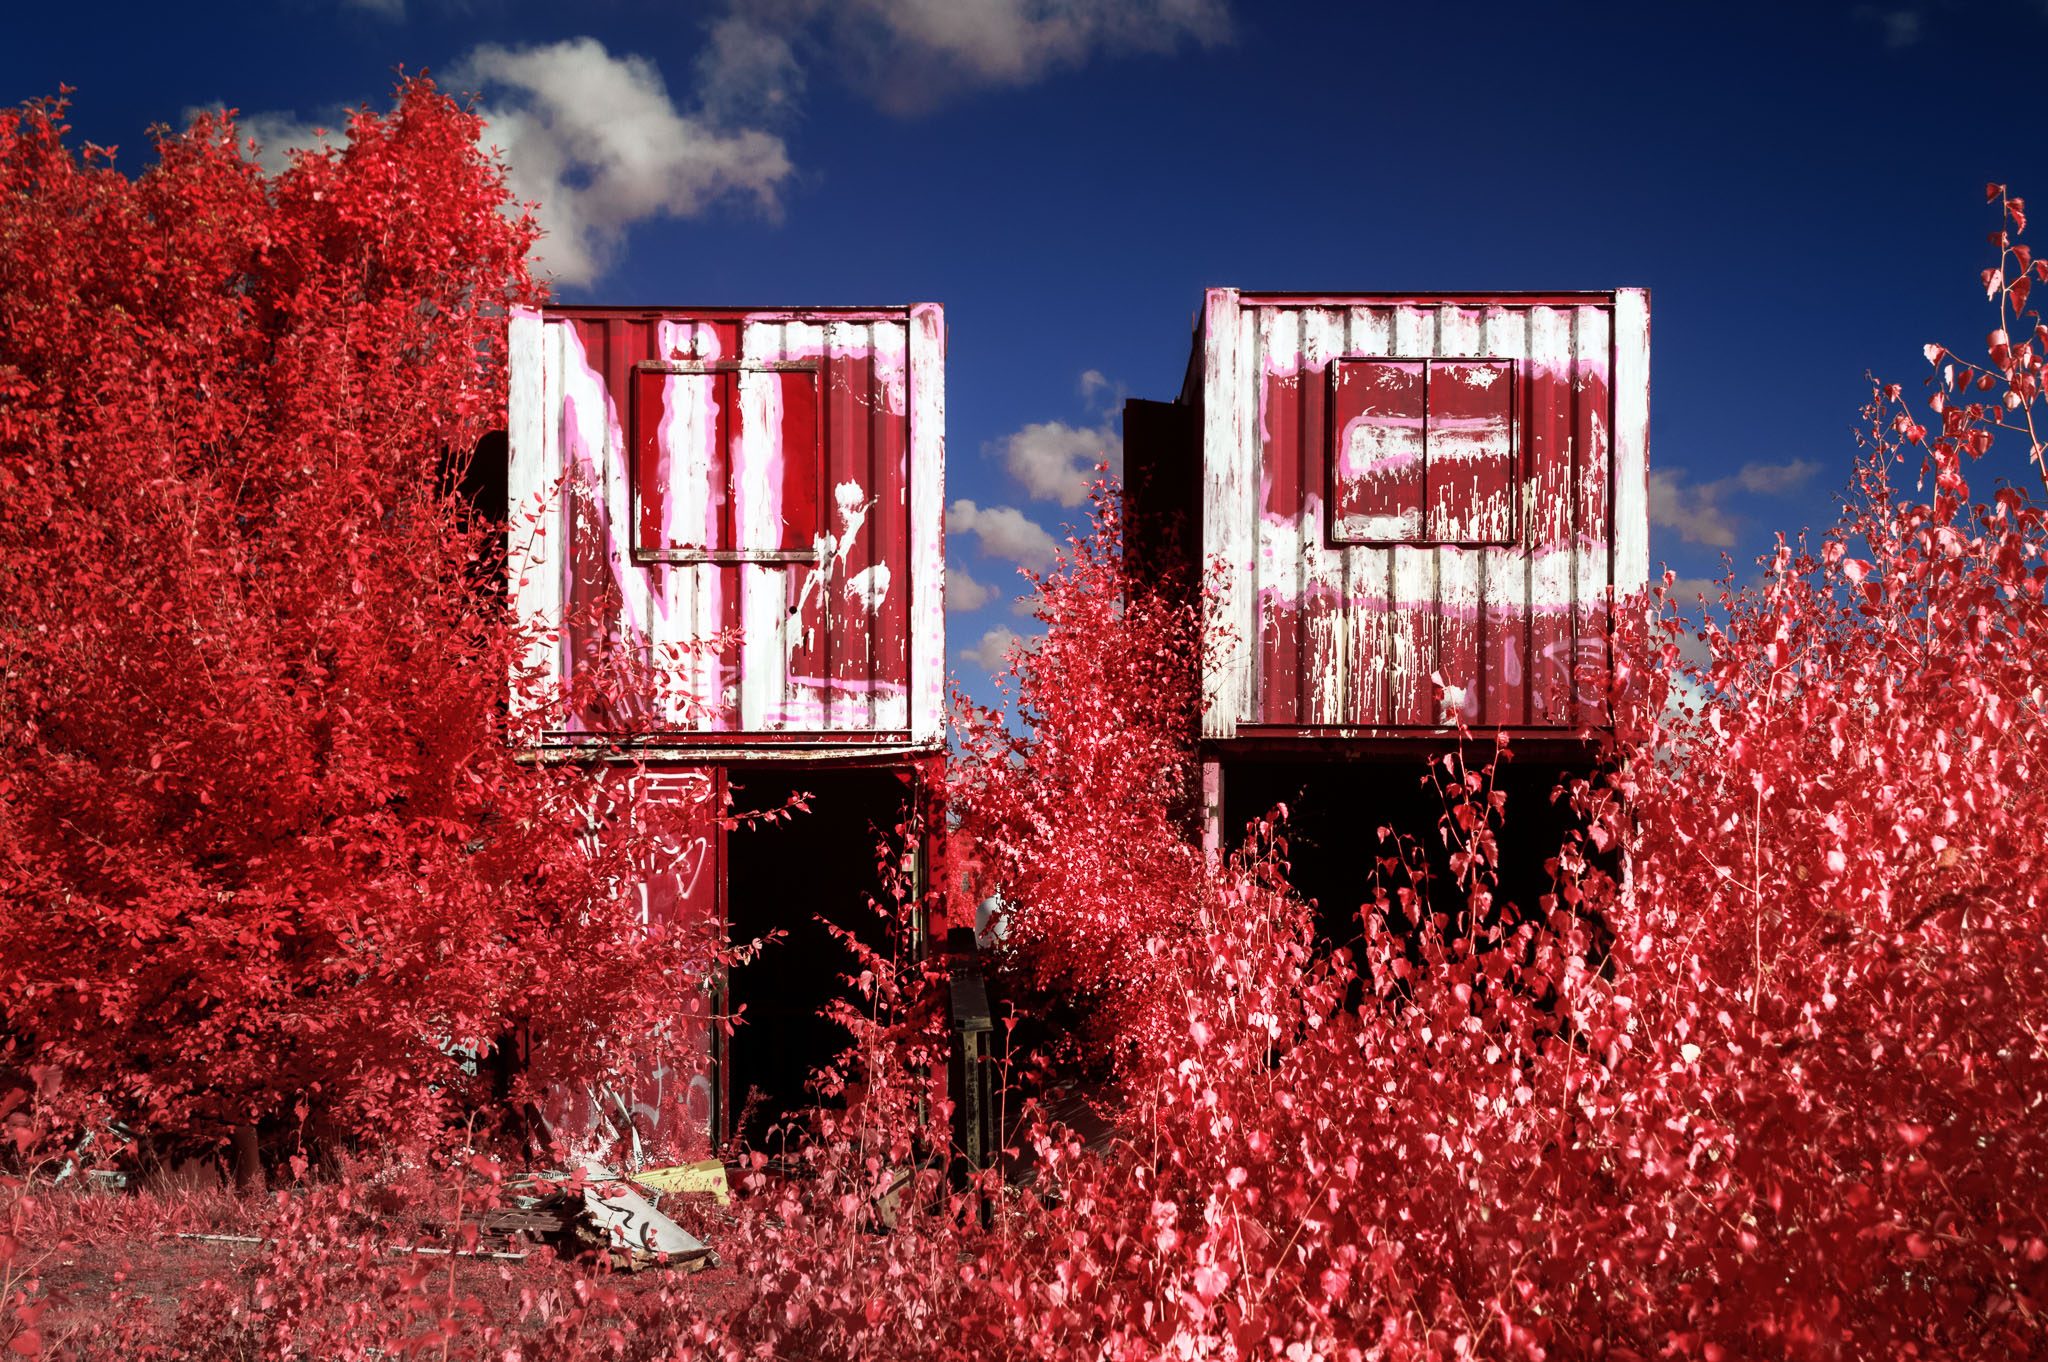 Kodak EIR Colour Infrared, Edgelands, Wasteland, Out of sight,  Shipping containers